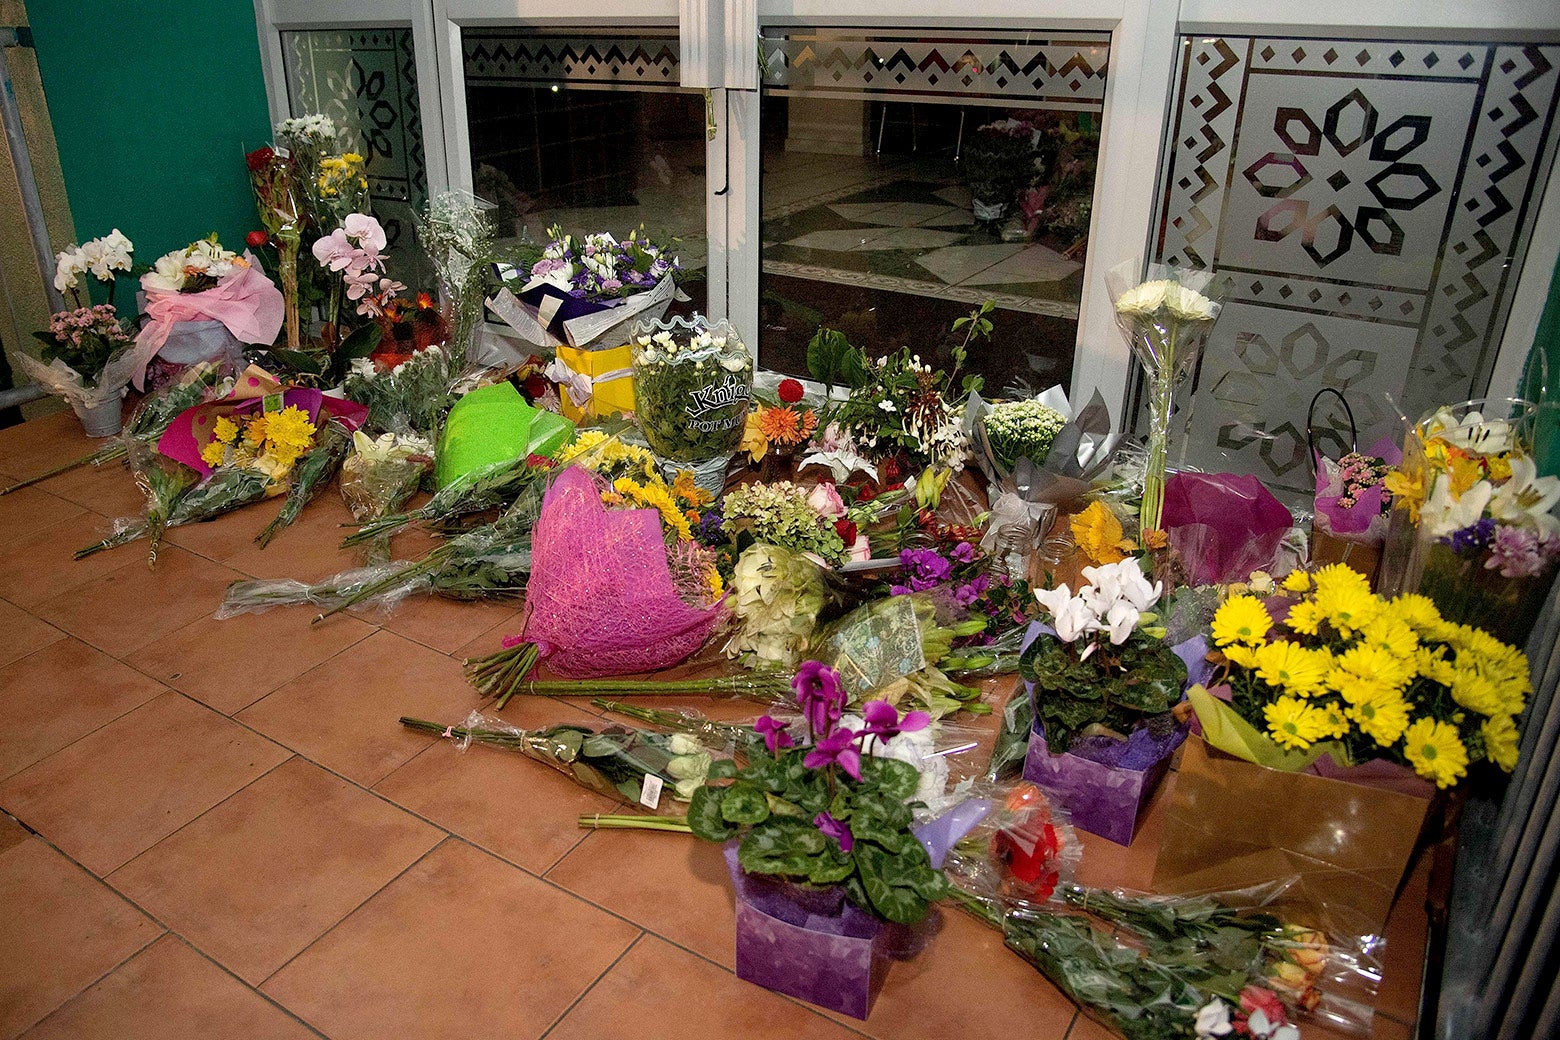 Flowers are placed on the front steps of the Wellington Masjid mosque.